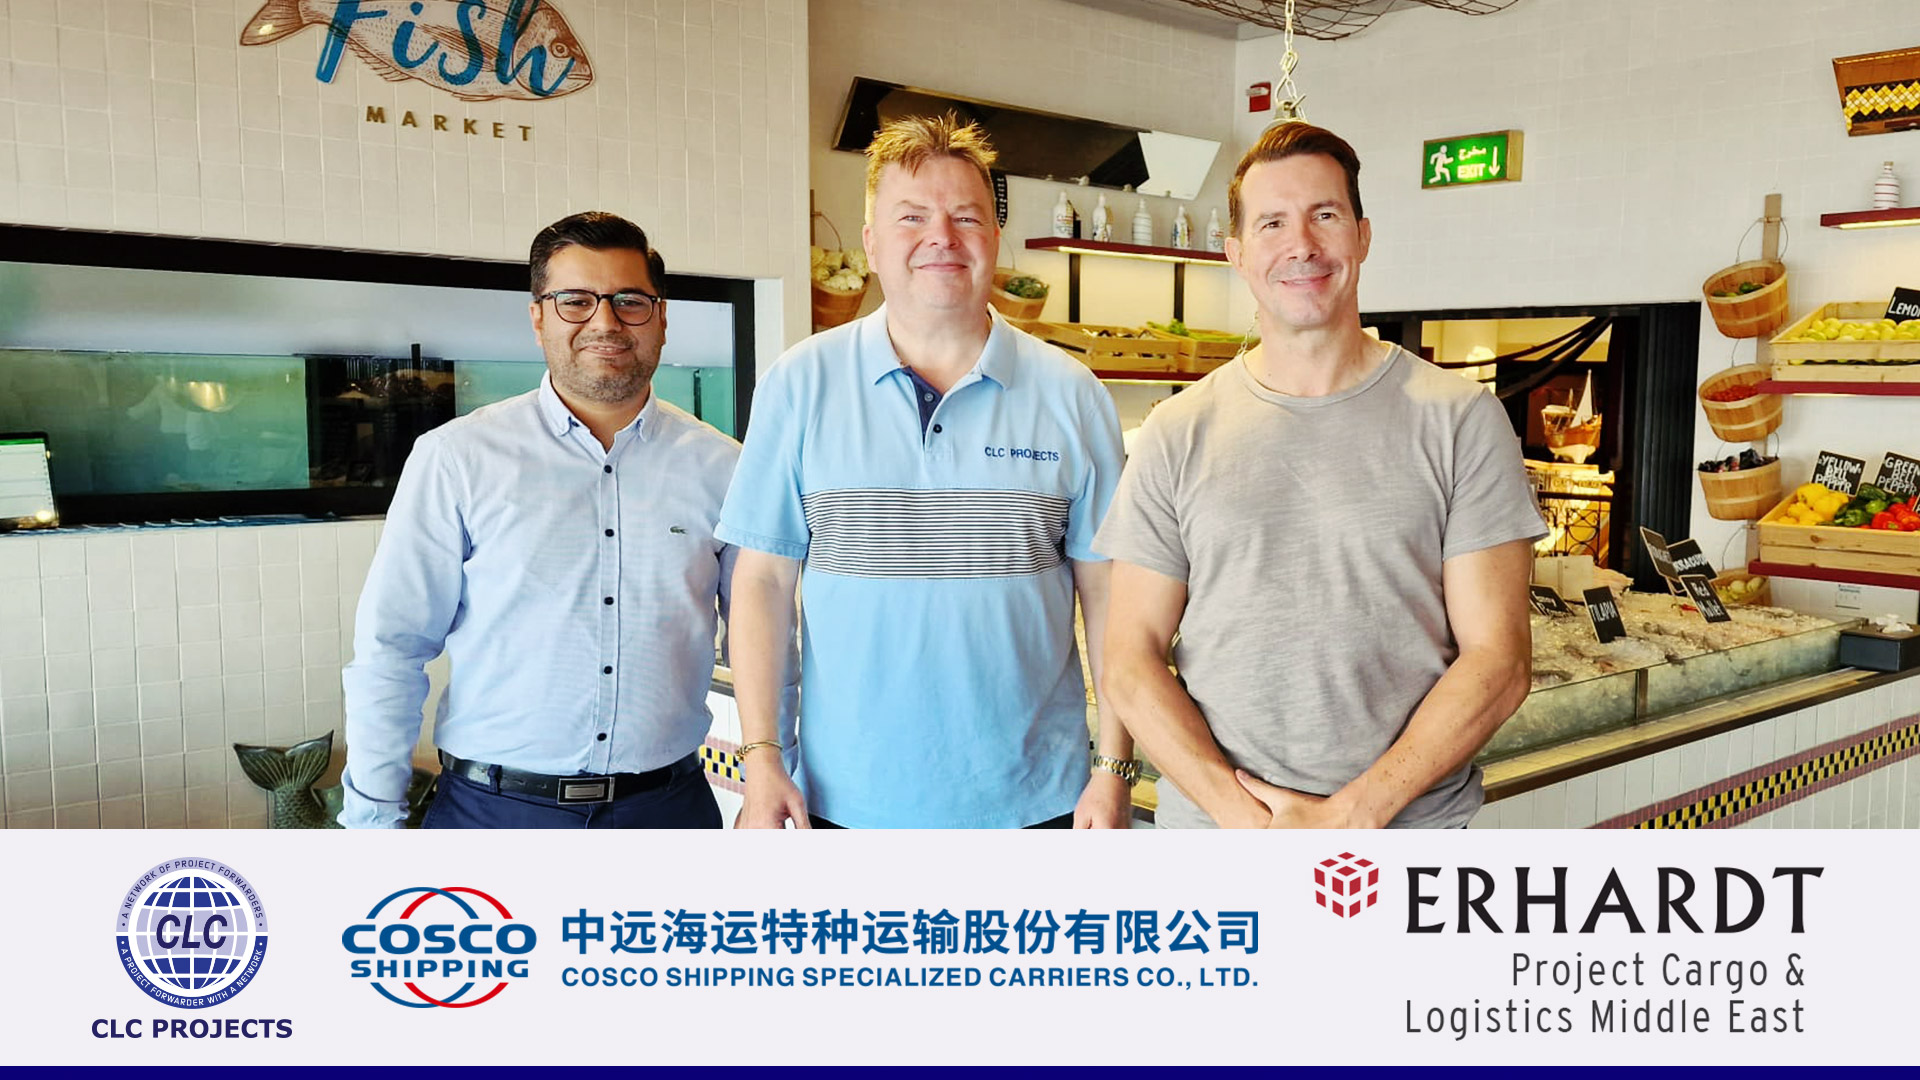 CLC Projects Chairman links COSCO Shipping Specialized Carriers with Erhardt Project Cargo & Logistics Middle East in Dubai UAE